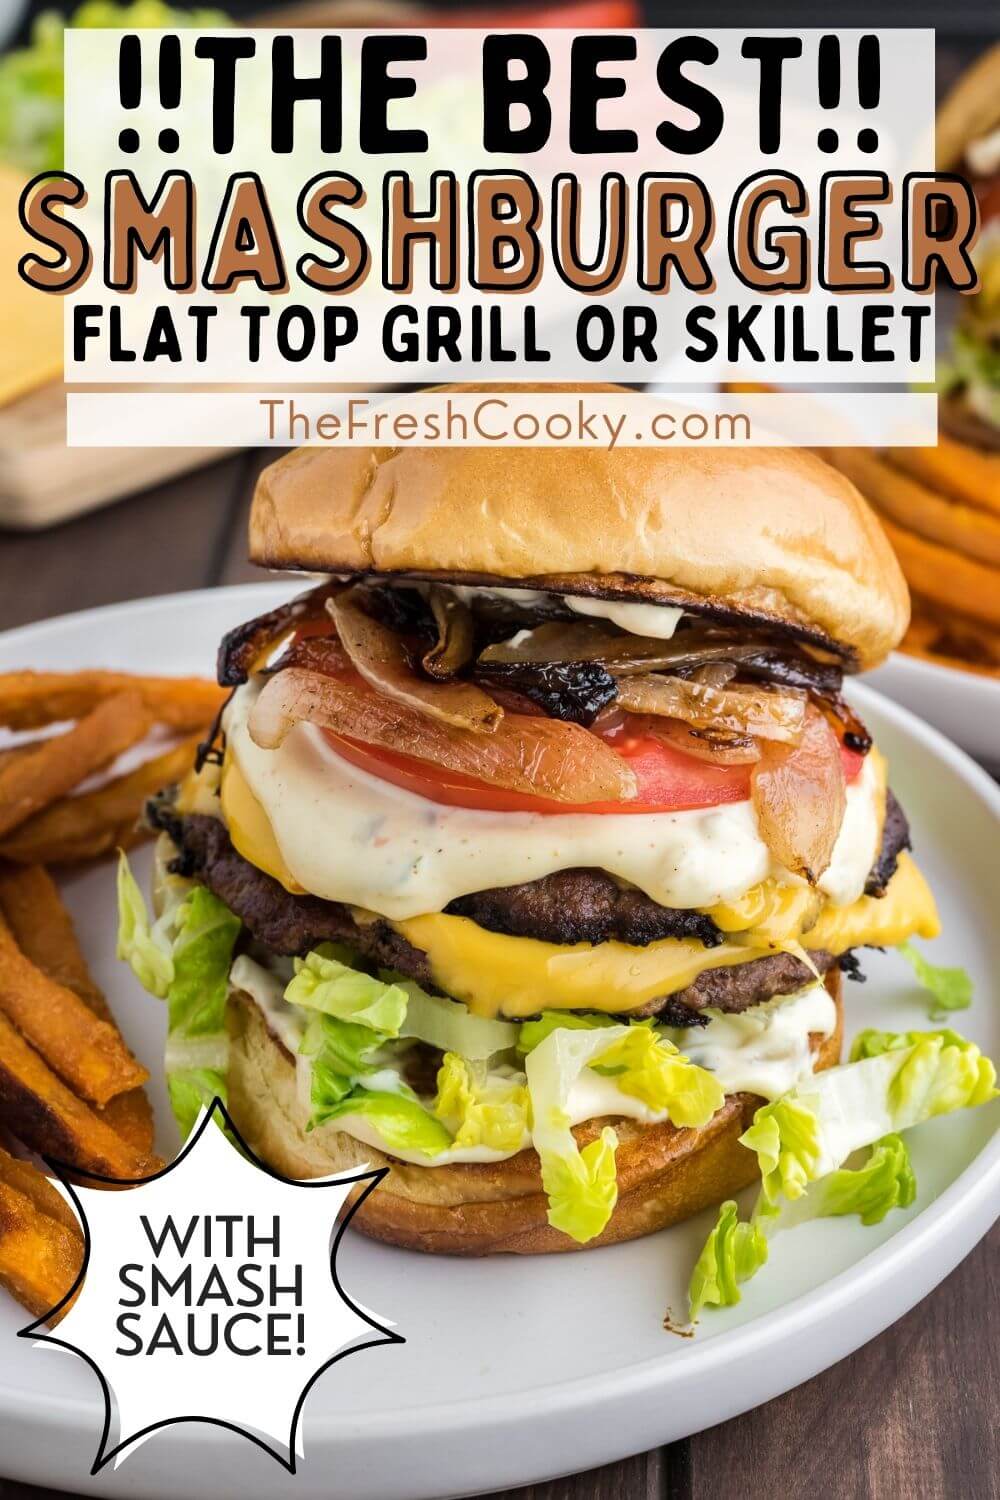 Best Smashburger recipe with grilled onions on a plate with fries, for pinning.